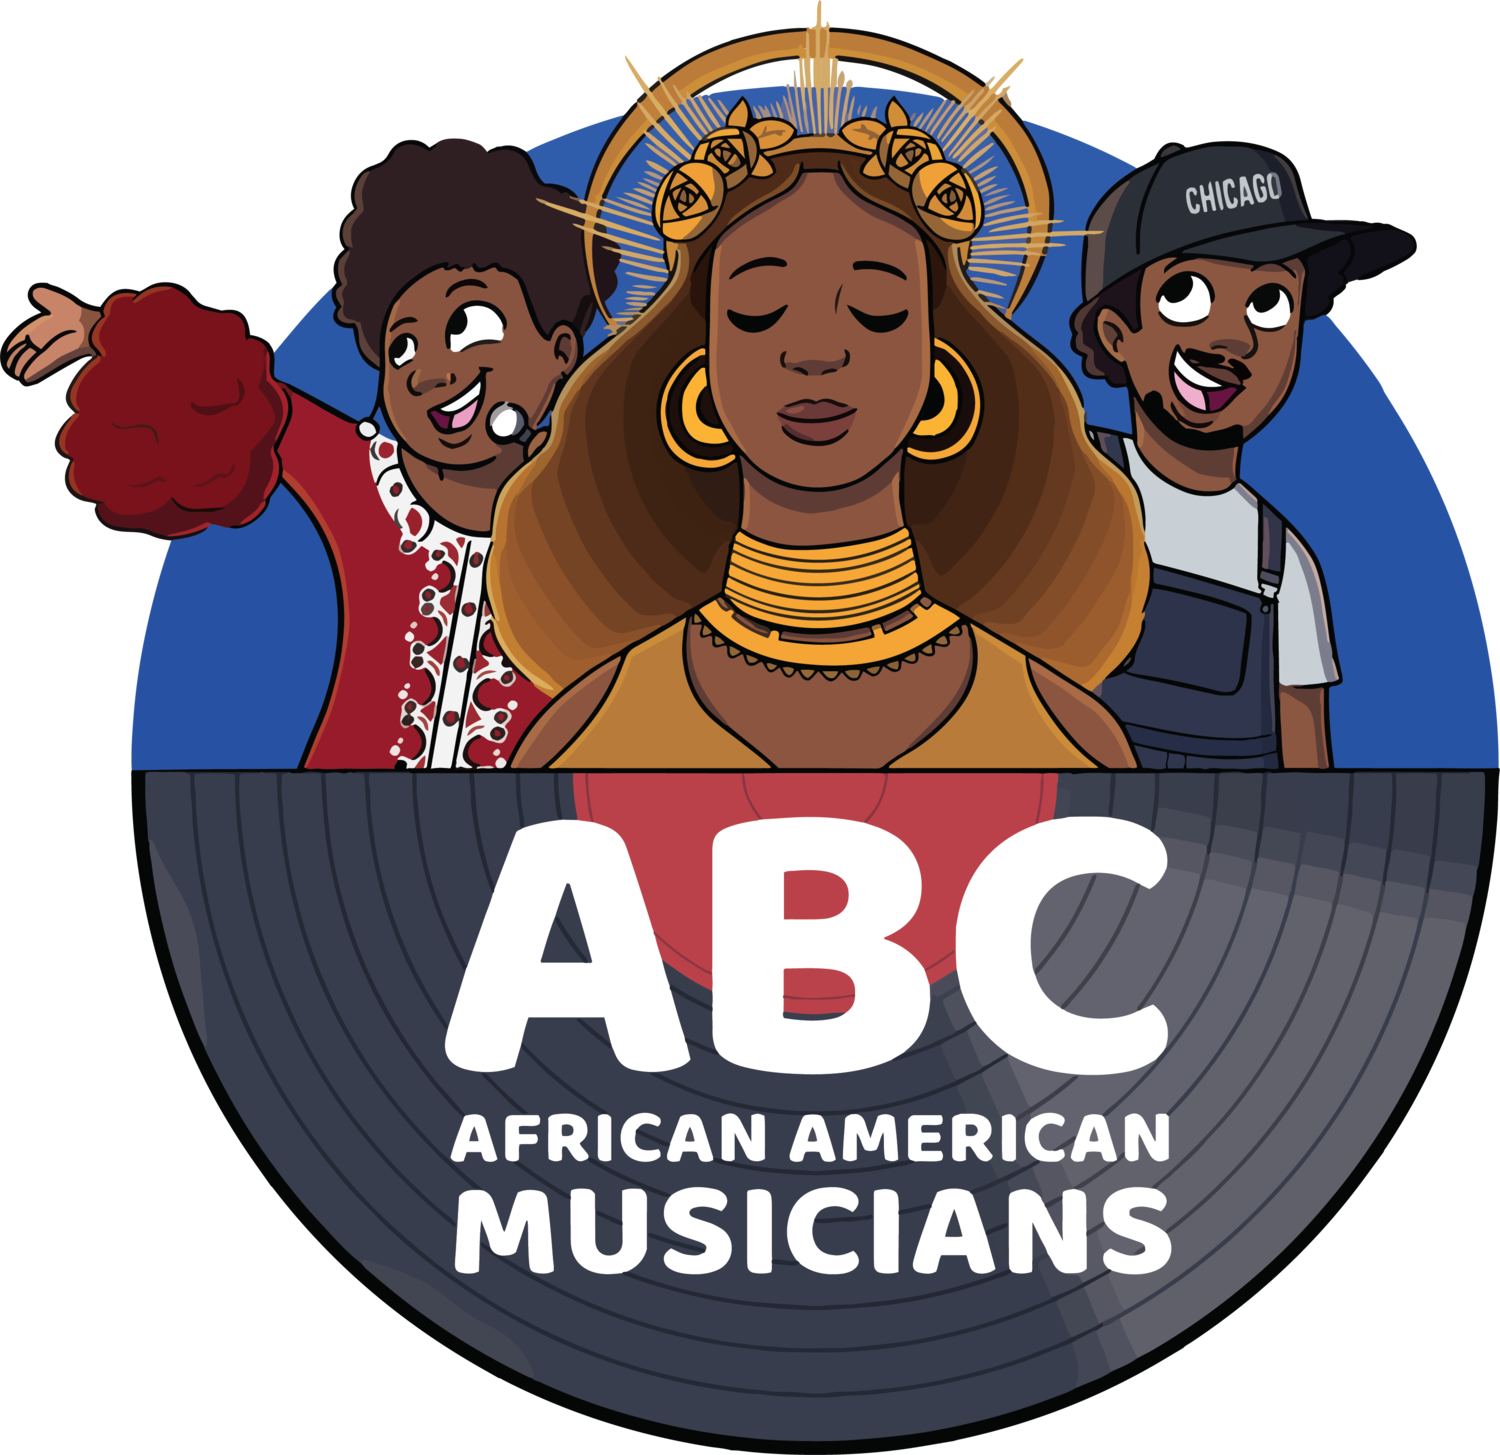 ABC AFRICAN AMERICAN MUSICIANS 